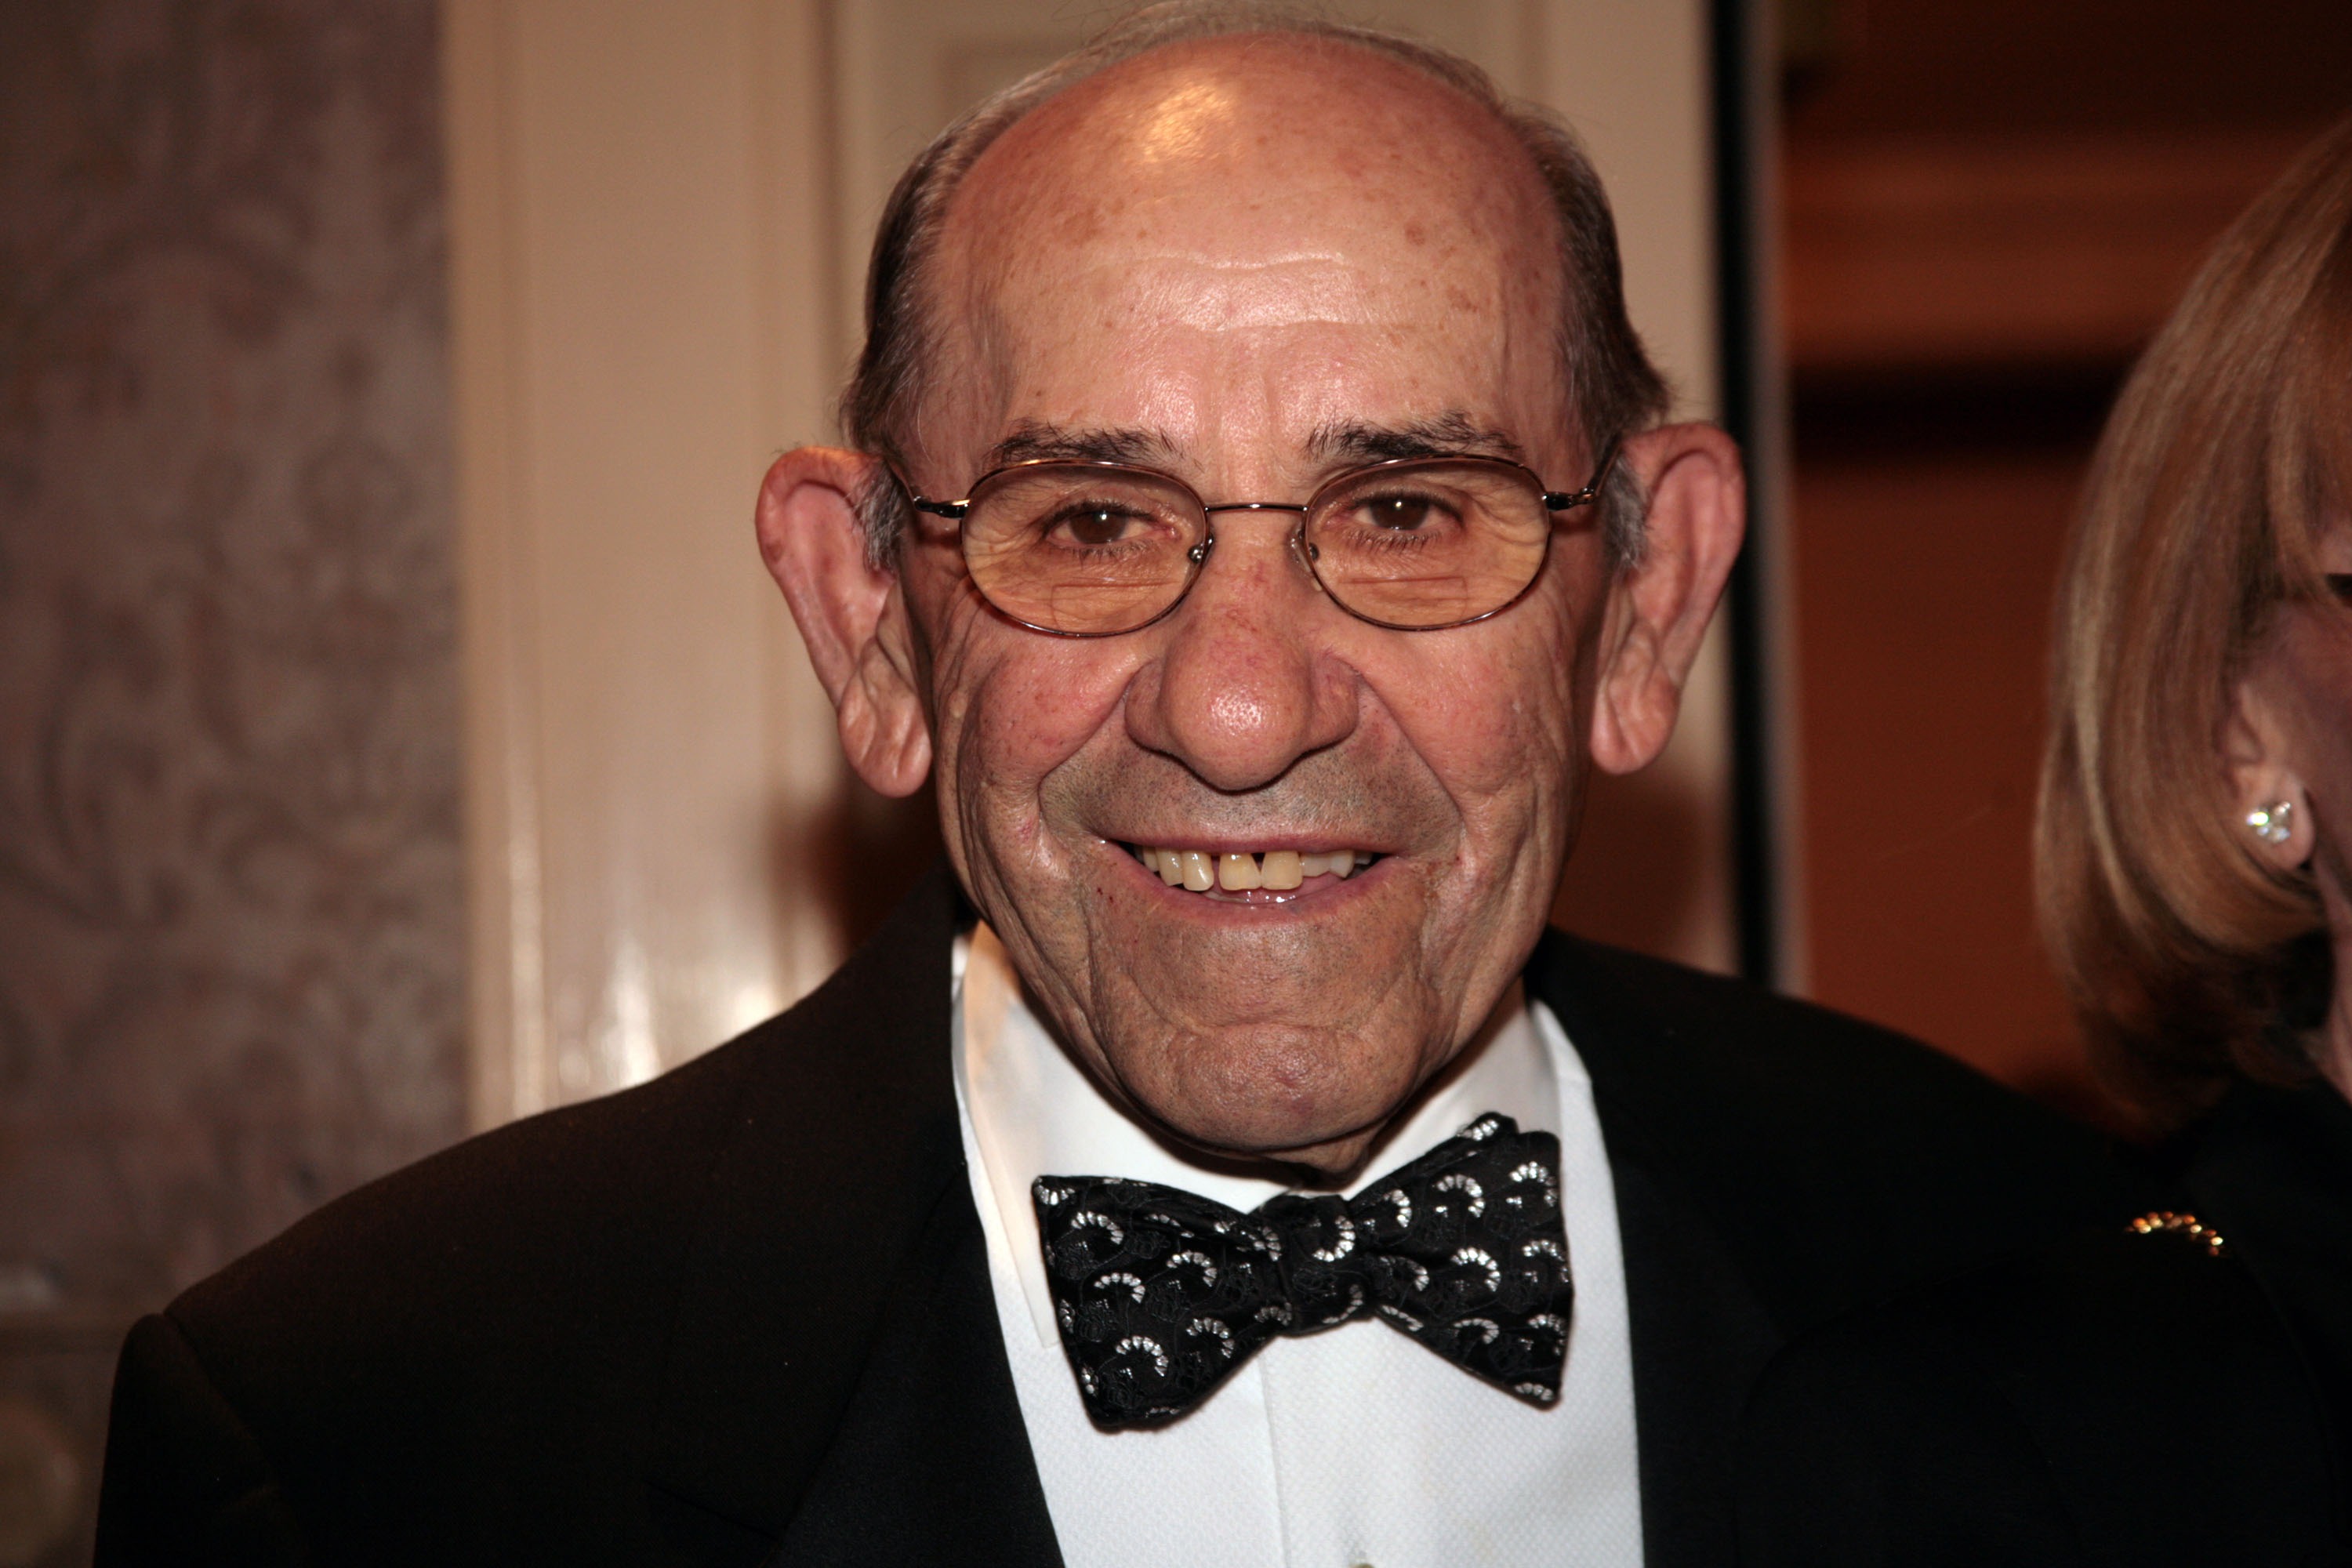 Yankees legend Yogi Berra arrives at NIAF's 32nd Anniversary Awards Gala on Oct. 13, 2007 in Washington, DC. (Photo by Nancy Ostertag/Getty Images)